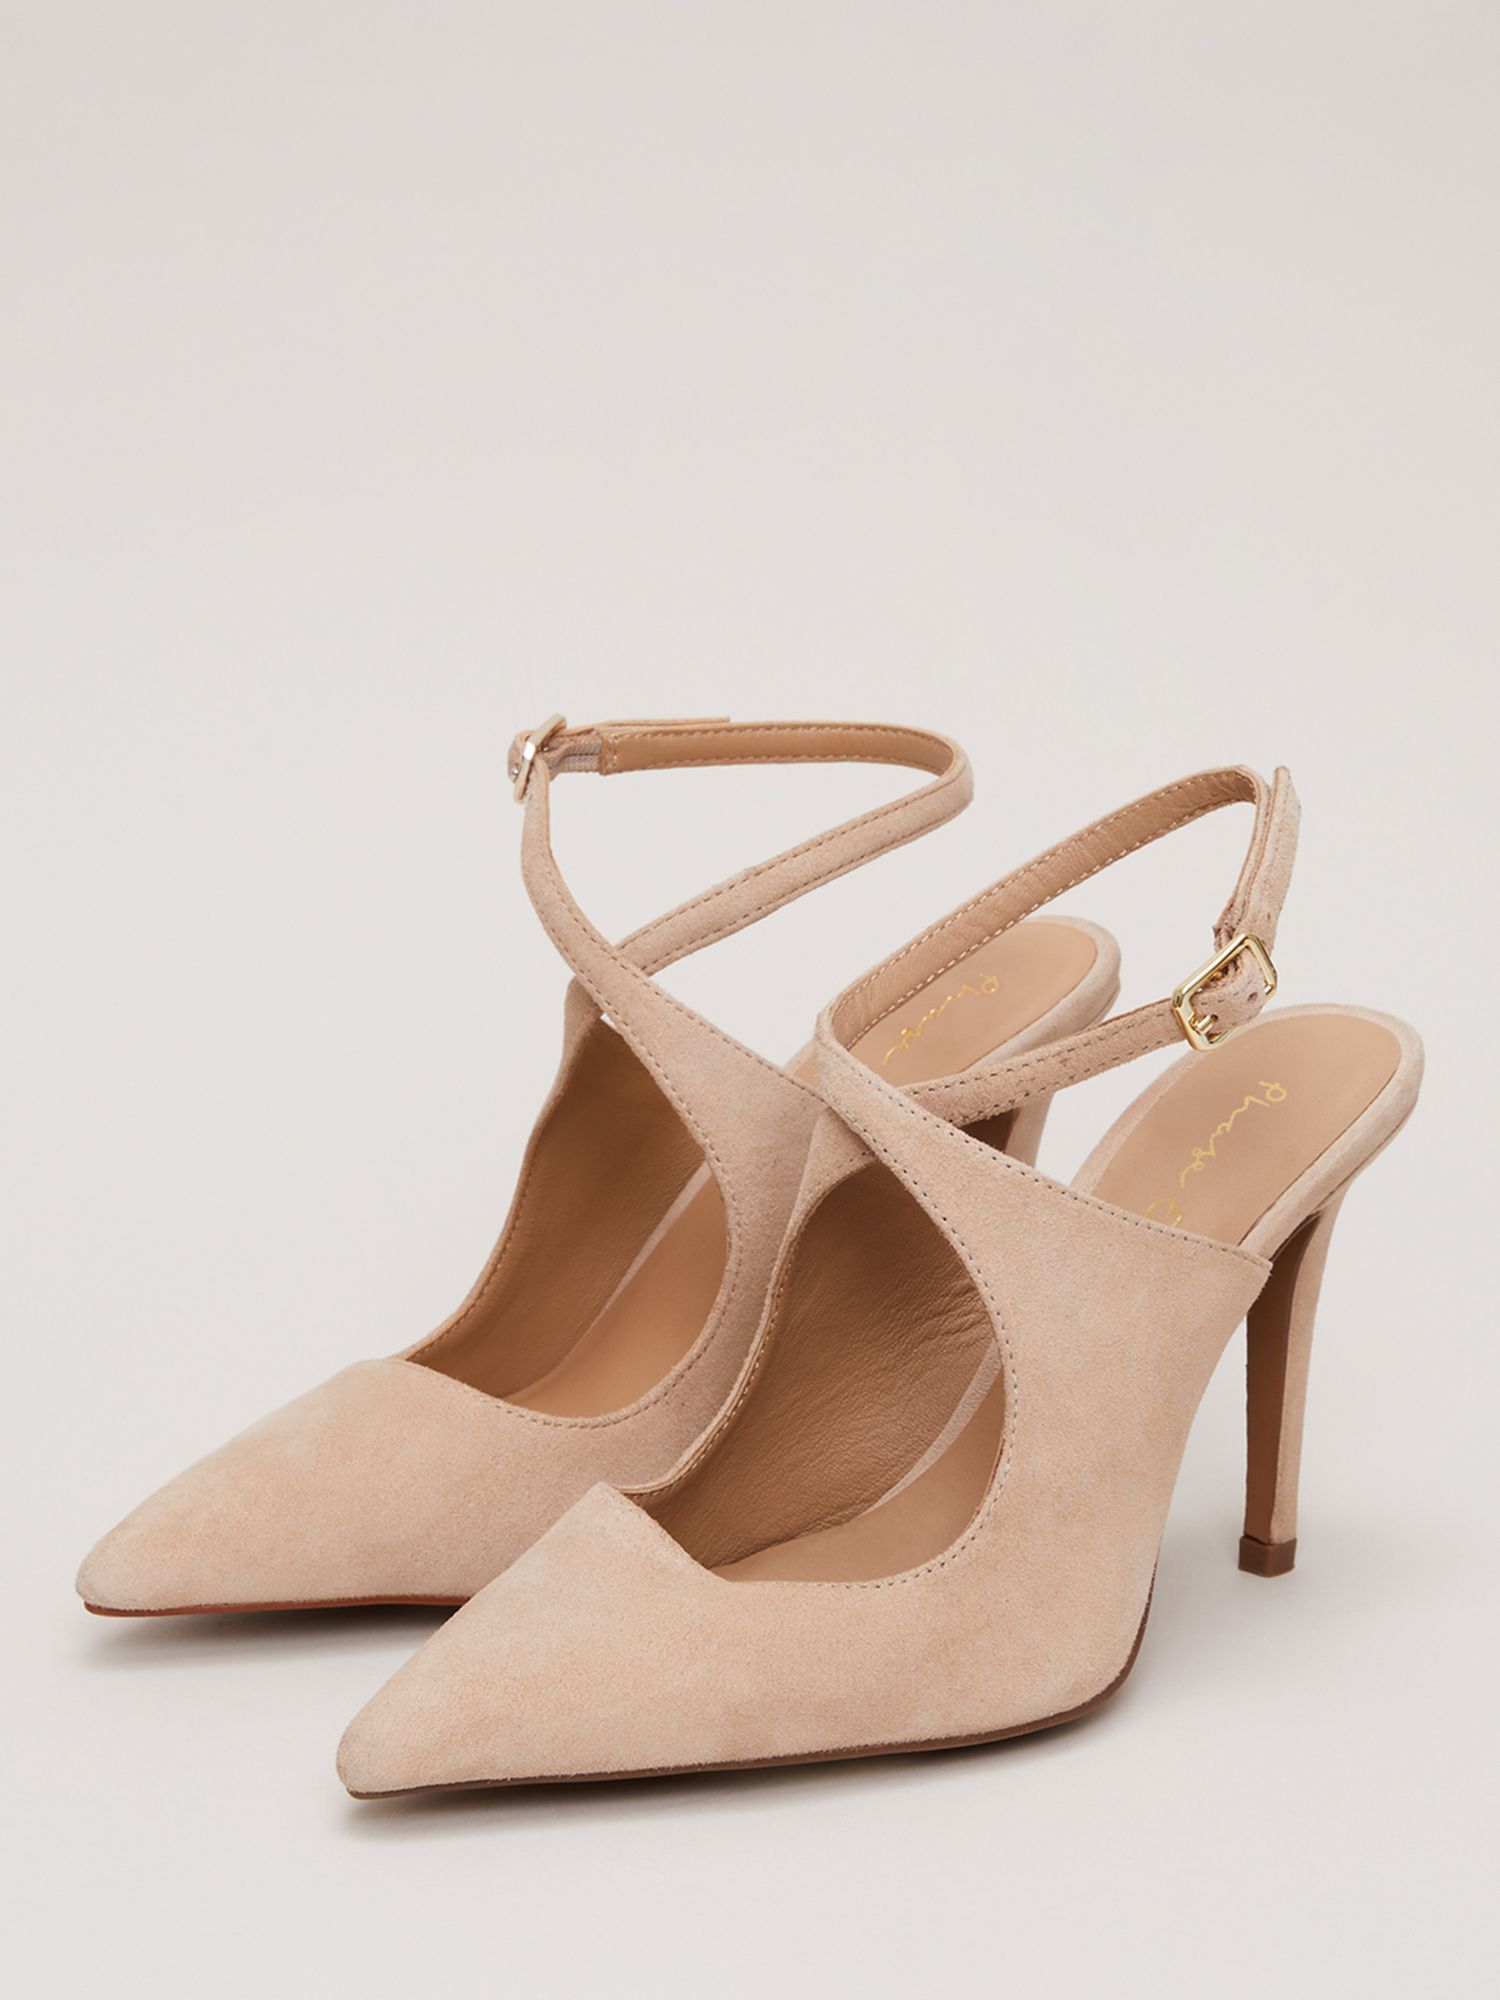 Phase Eight Suede Cross Ankle Strap High Heel Shoes, Neutral, EU36